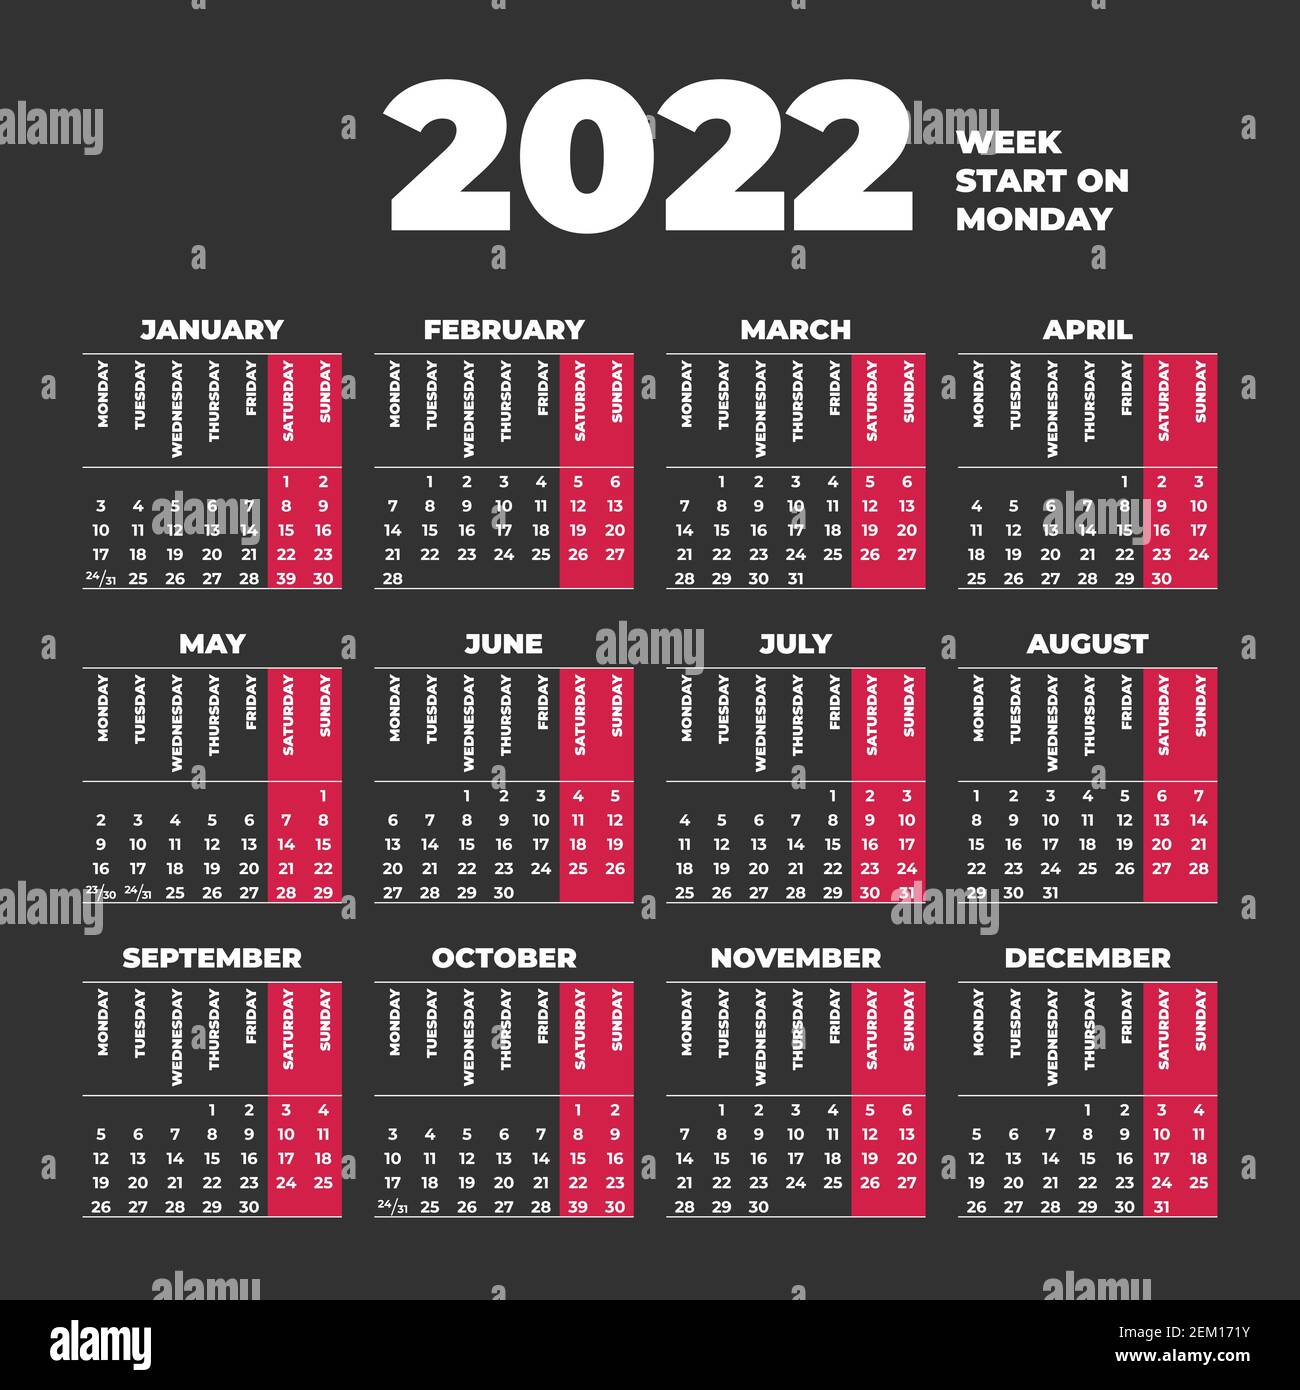 2022 Calendar template with weeks start on Monday Stock Vector